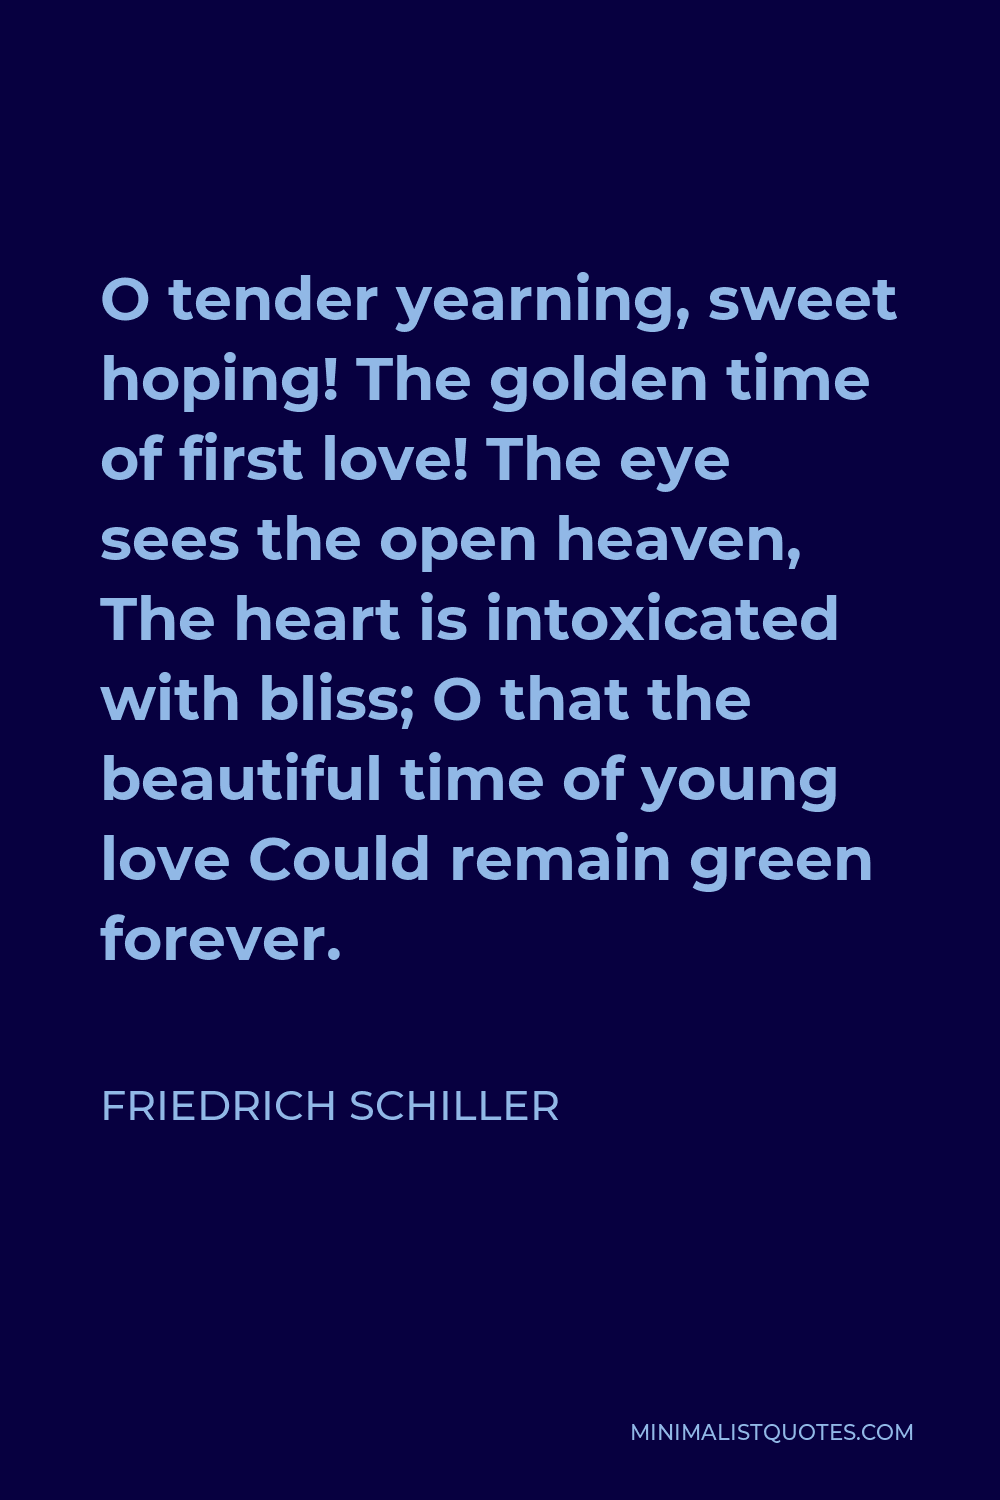 Friedrich Schiller Quote - O tender yearning, sweet hoping! The golden time of first love! The eye sees the open heaven, The heart is intoxicated with bliss; O that the beautiful time of young love Could remain green forever.